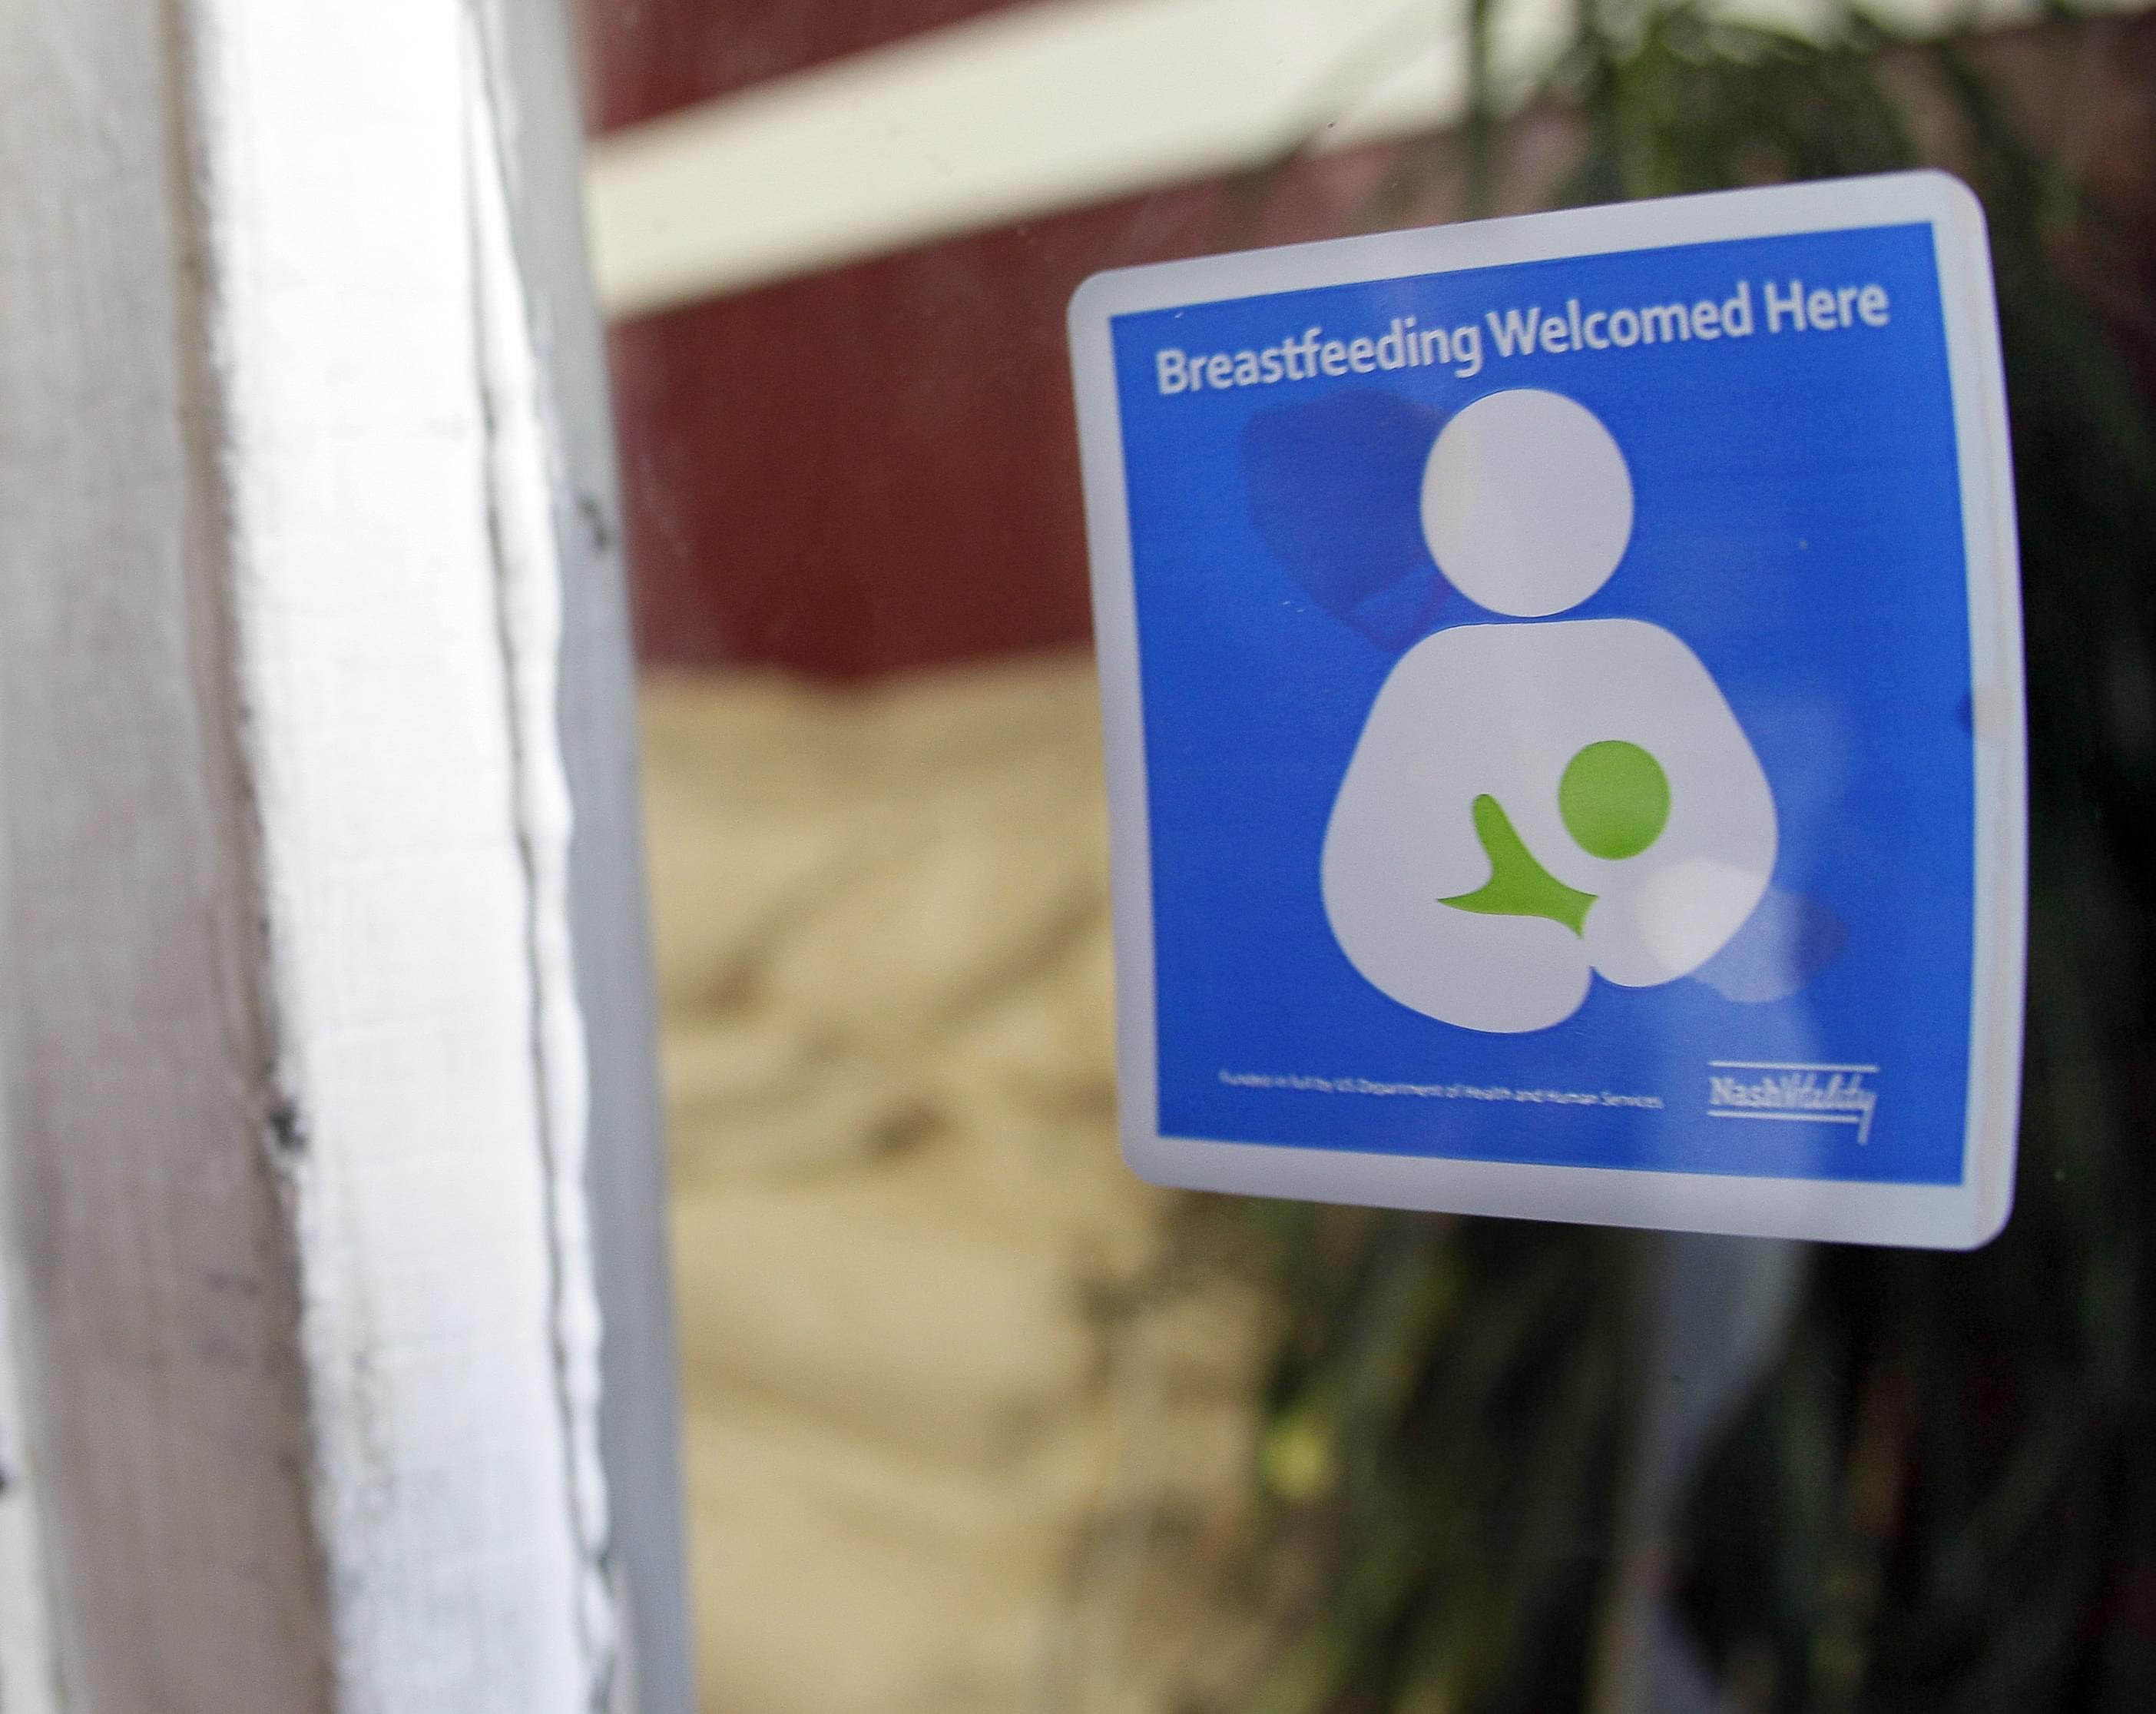 A decal reading "Breastfeeding Welcomed Here" is displayed on the door to a store on Thursday, Aug. 11, 2011, in Nashville, Tenn. Nashville&#039;s Metro Health Department is encouraging local businesses to make breastfeeding mothers fee